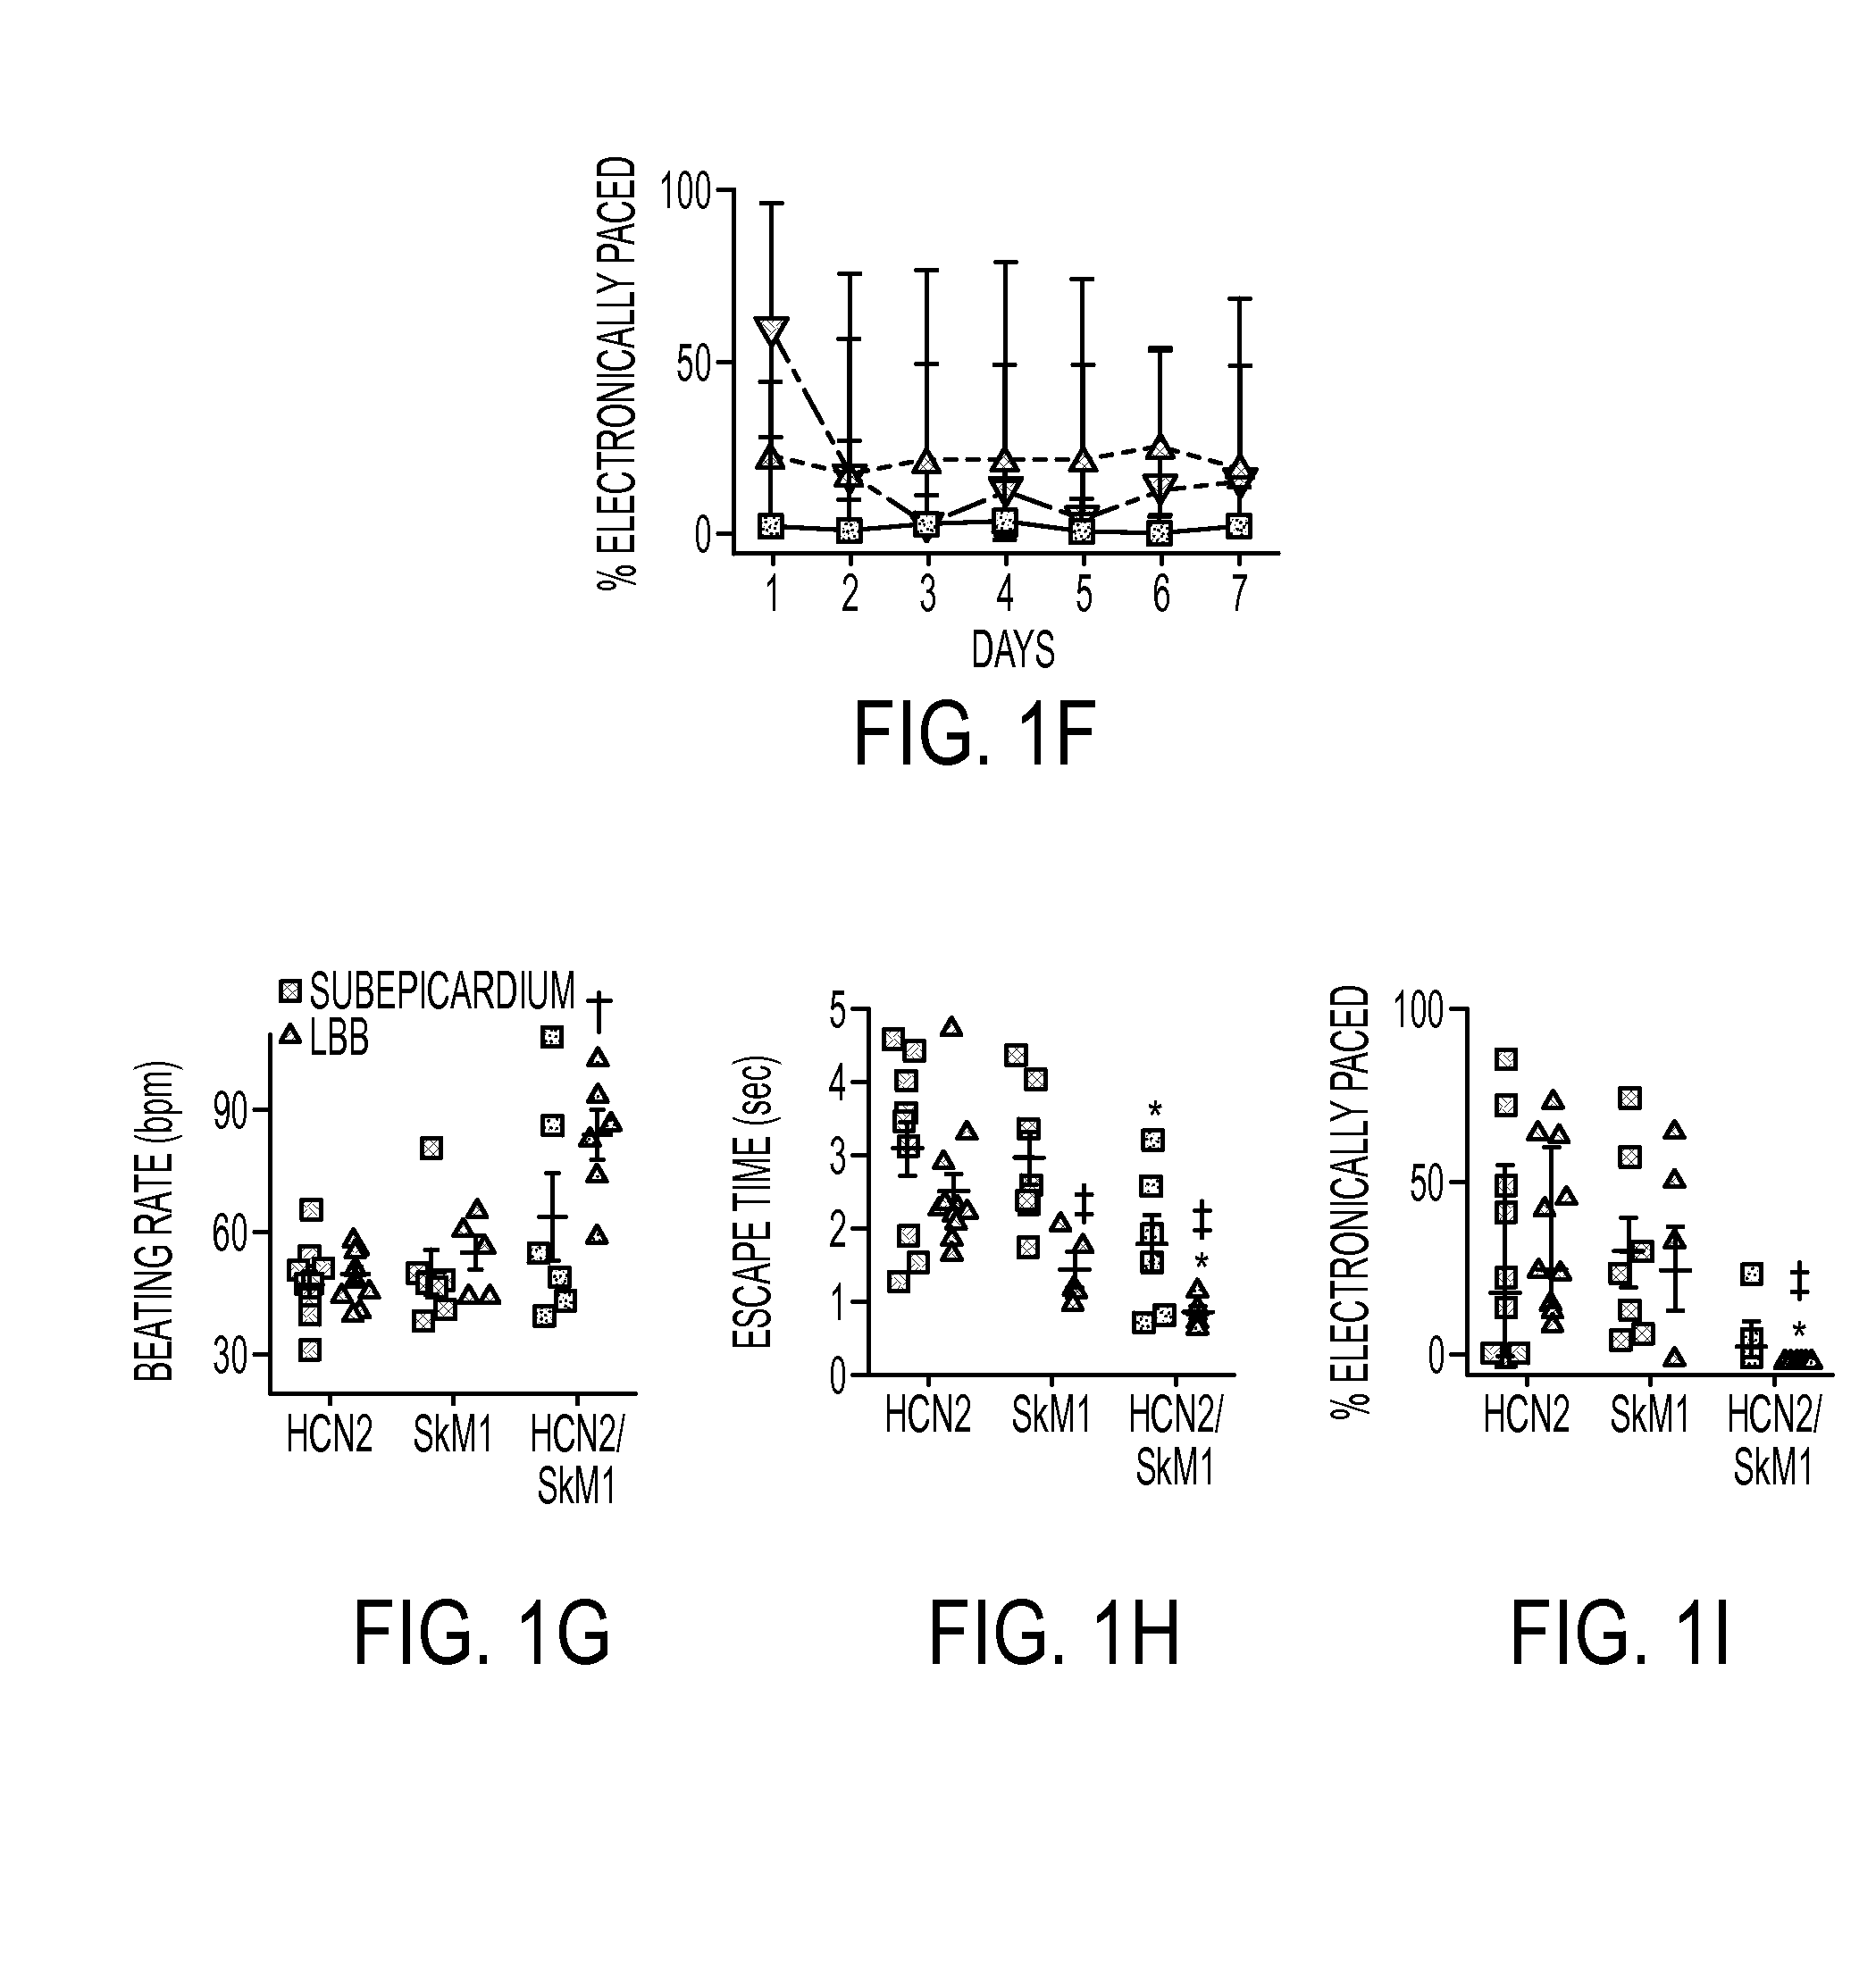 Biological Pacemakers Incorporating HCN2 and SkM1 Genes